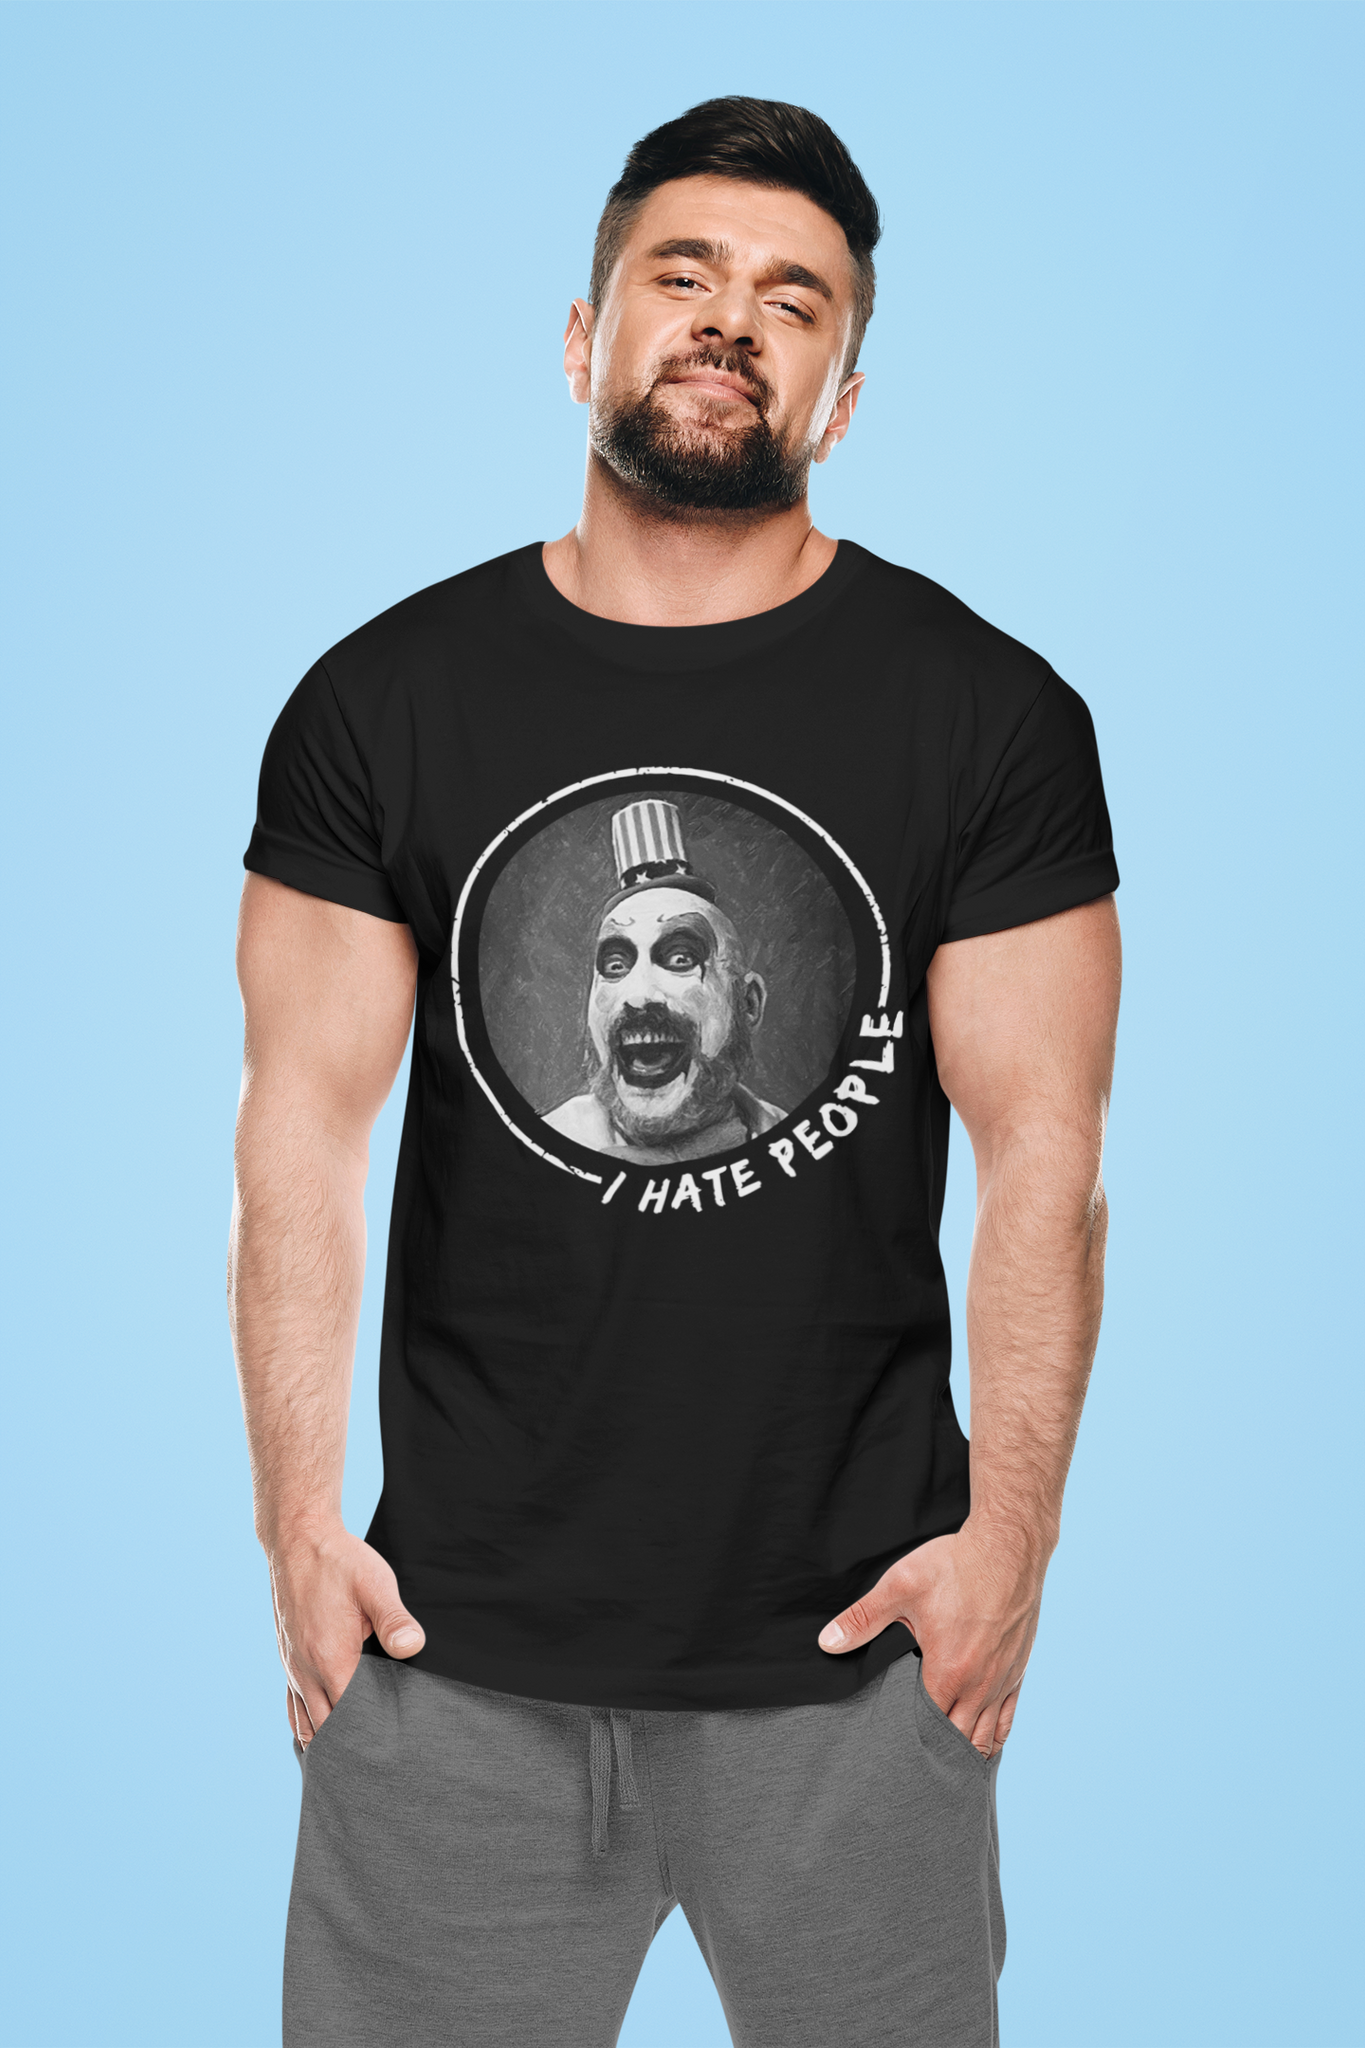 House Of 1000 Corpses T Shirt, Captain Spaulding Tshirt, I Hate People Shirt, Halloween Gifts